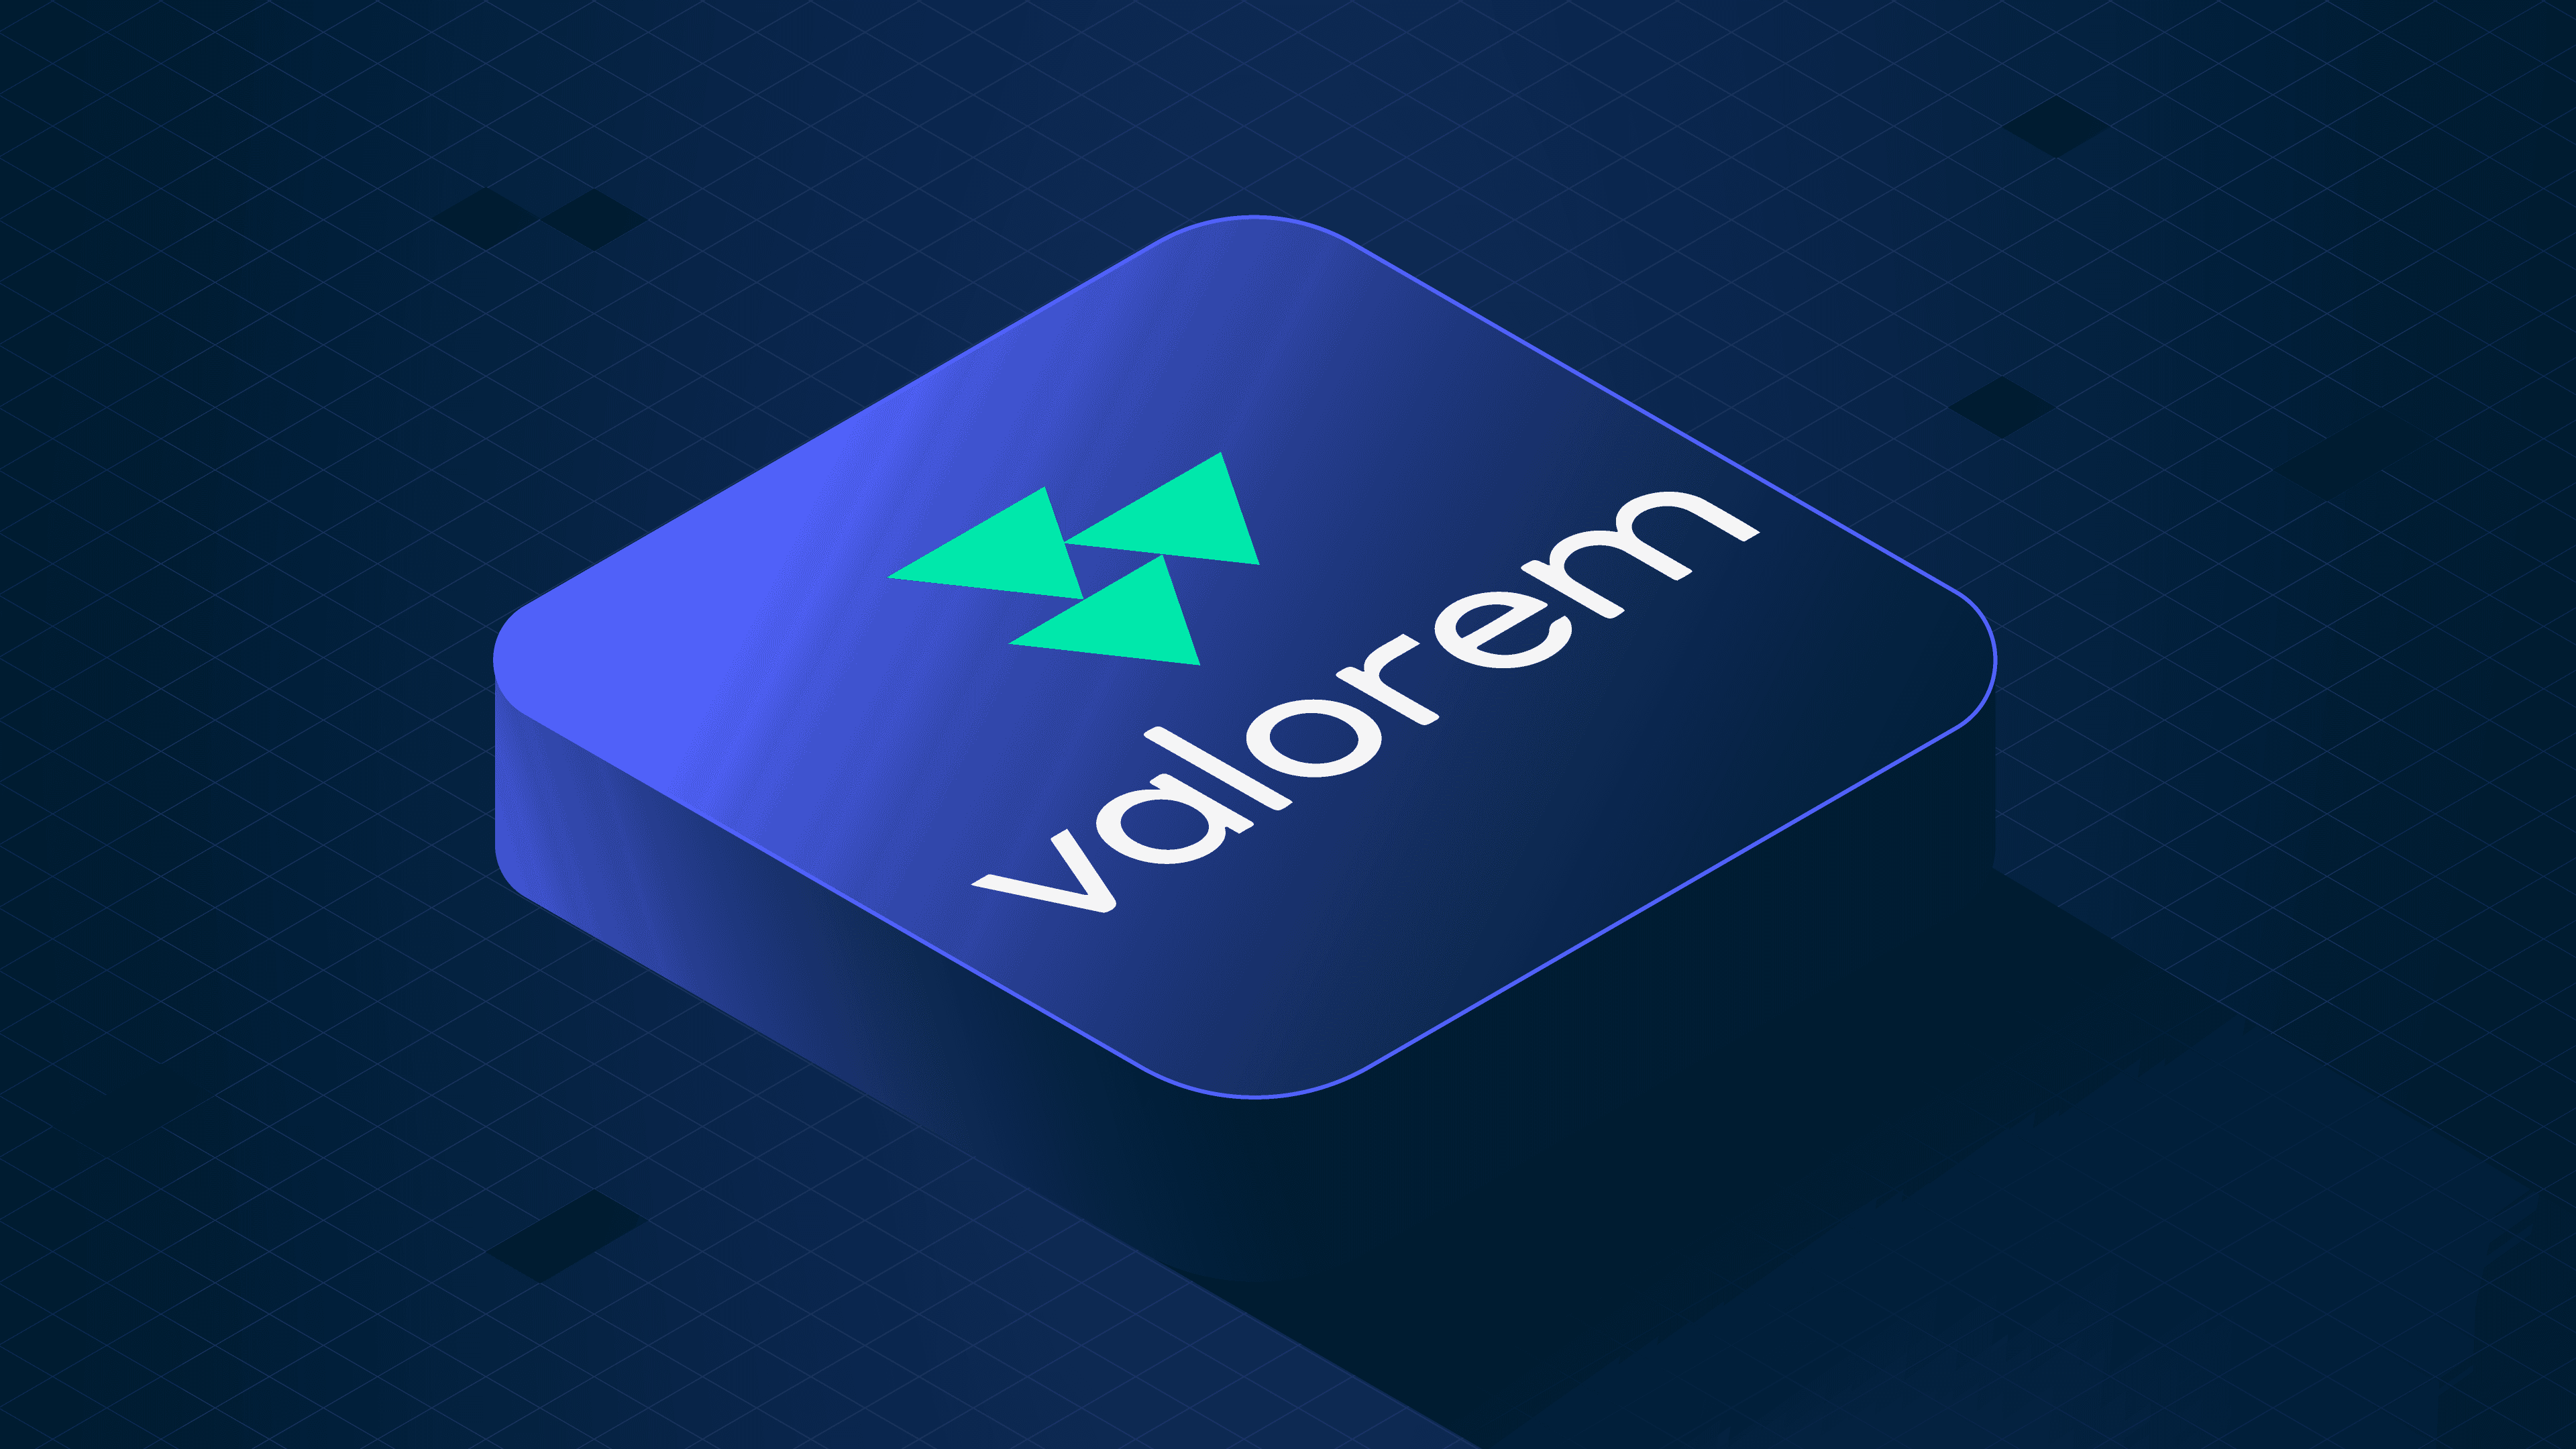 Valorem: A New Approach to DeFi Options